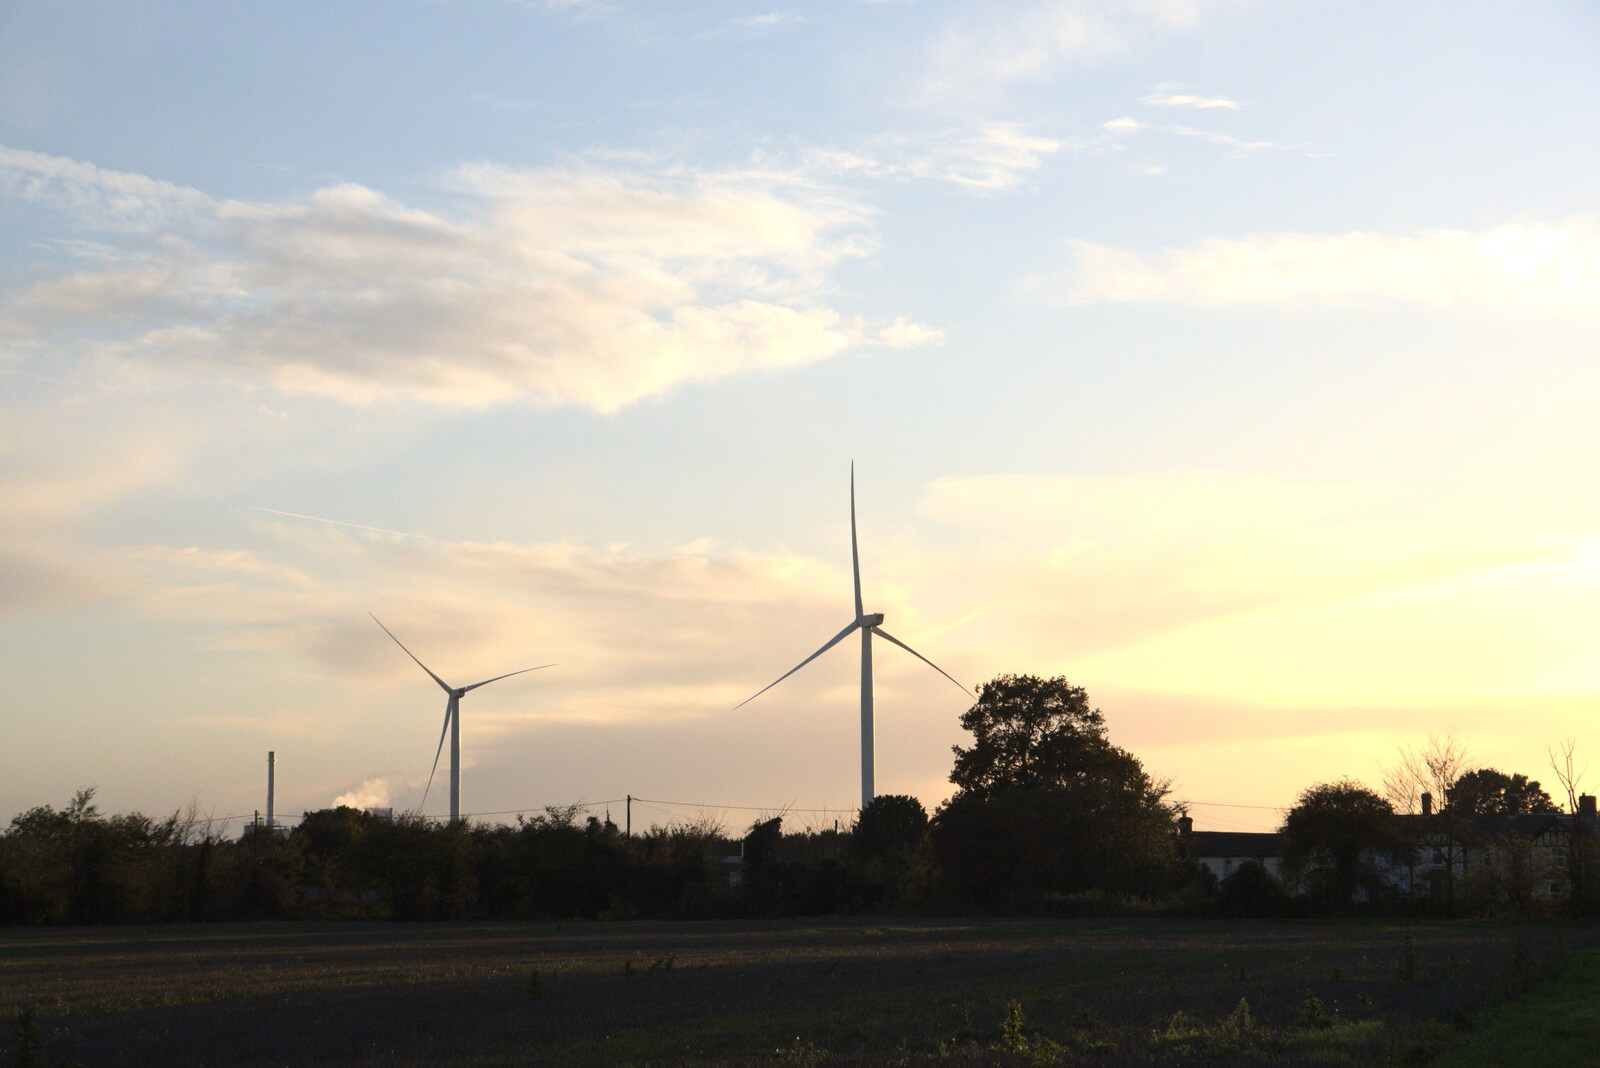 The wind turbines of Eye Airfield from A Walk Around the Avenue, Brome, Suffolk - 25th October 2020